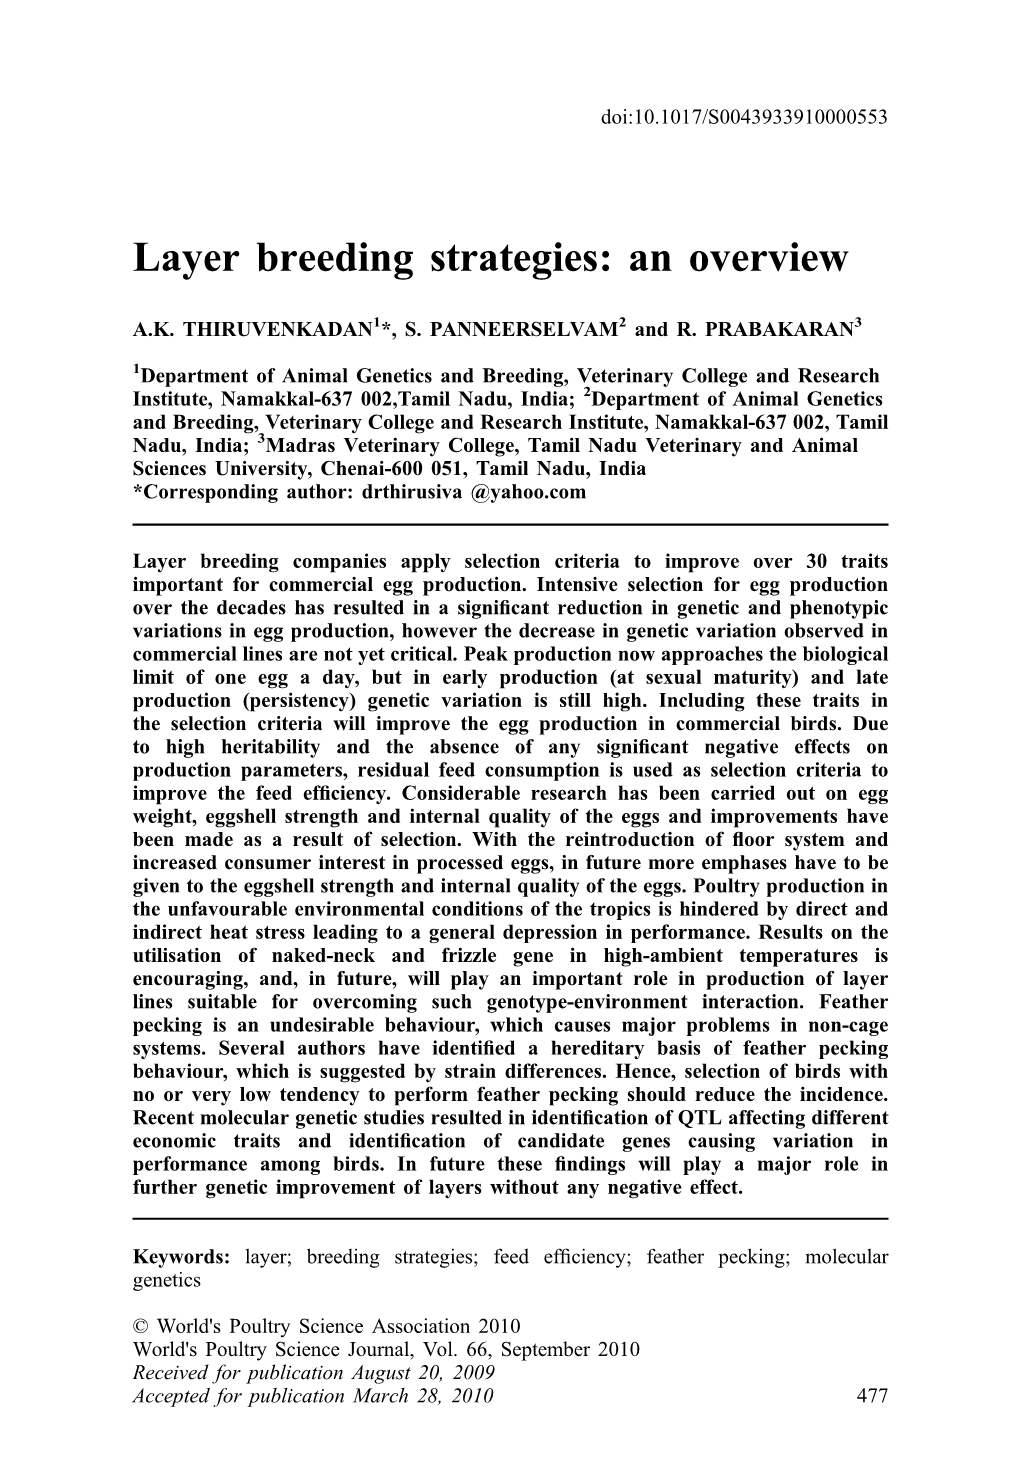 Layer Breeding Strategies: an Overview